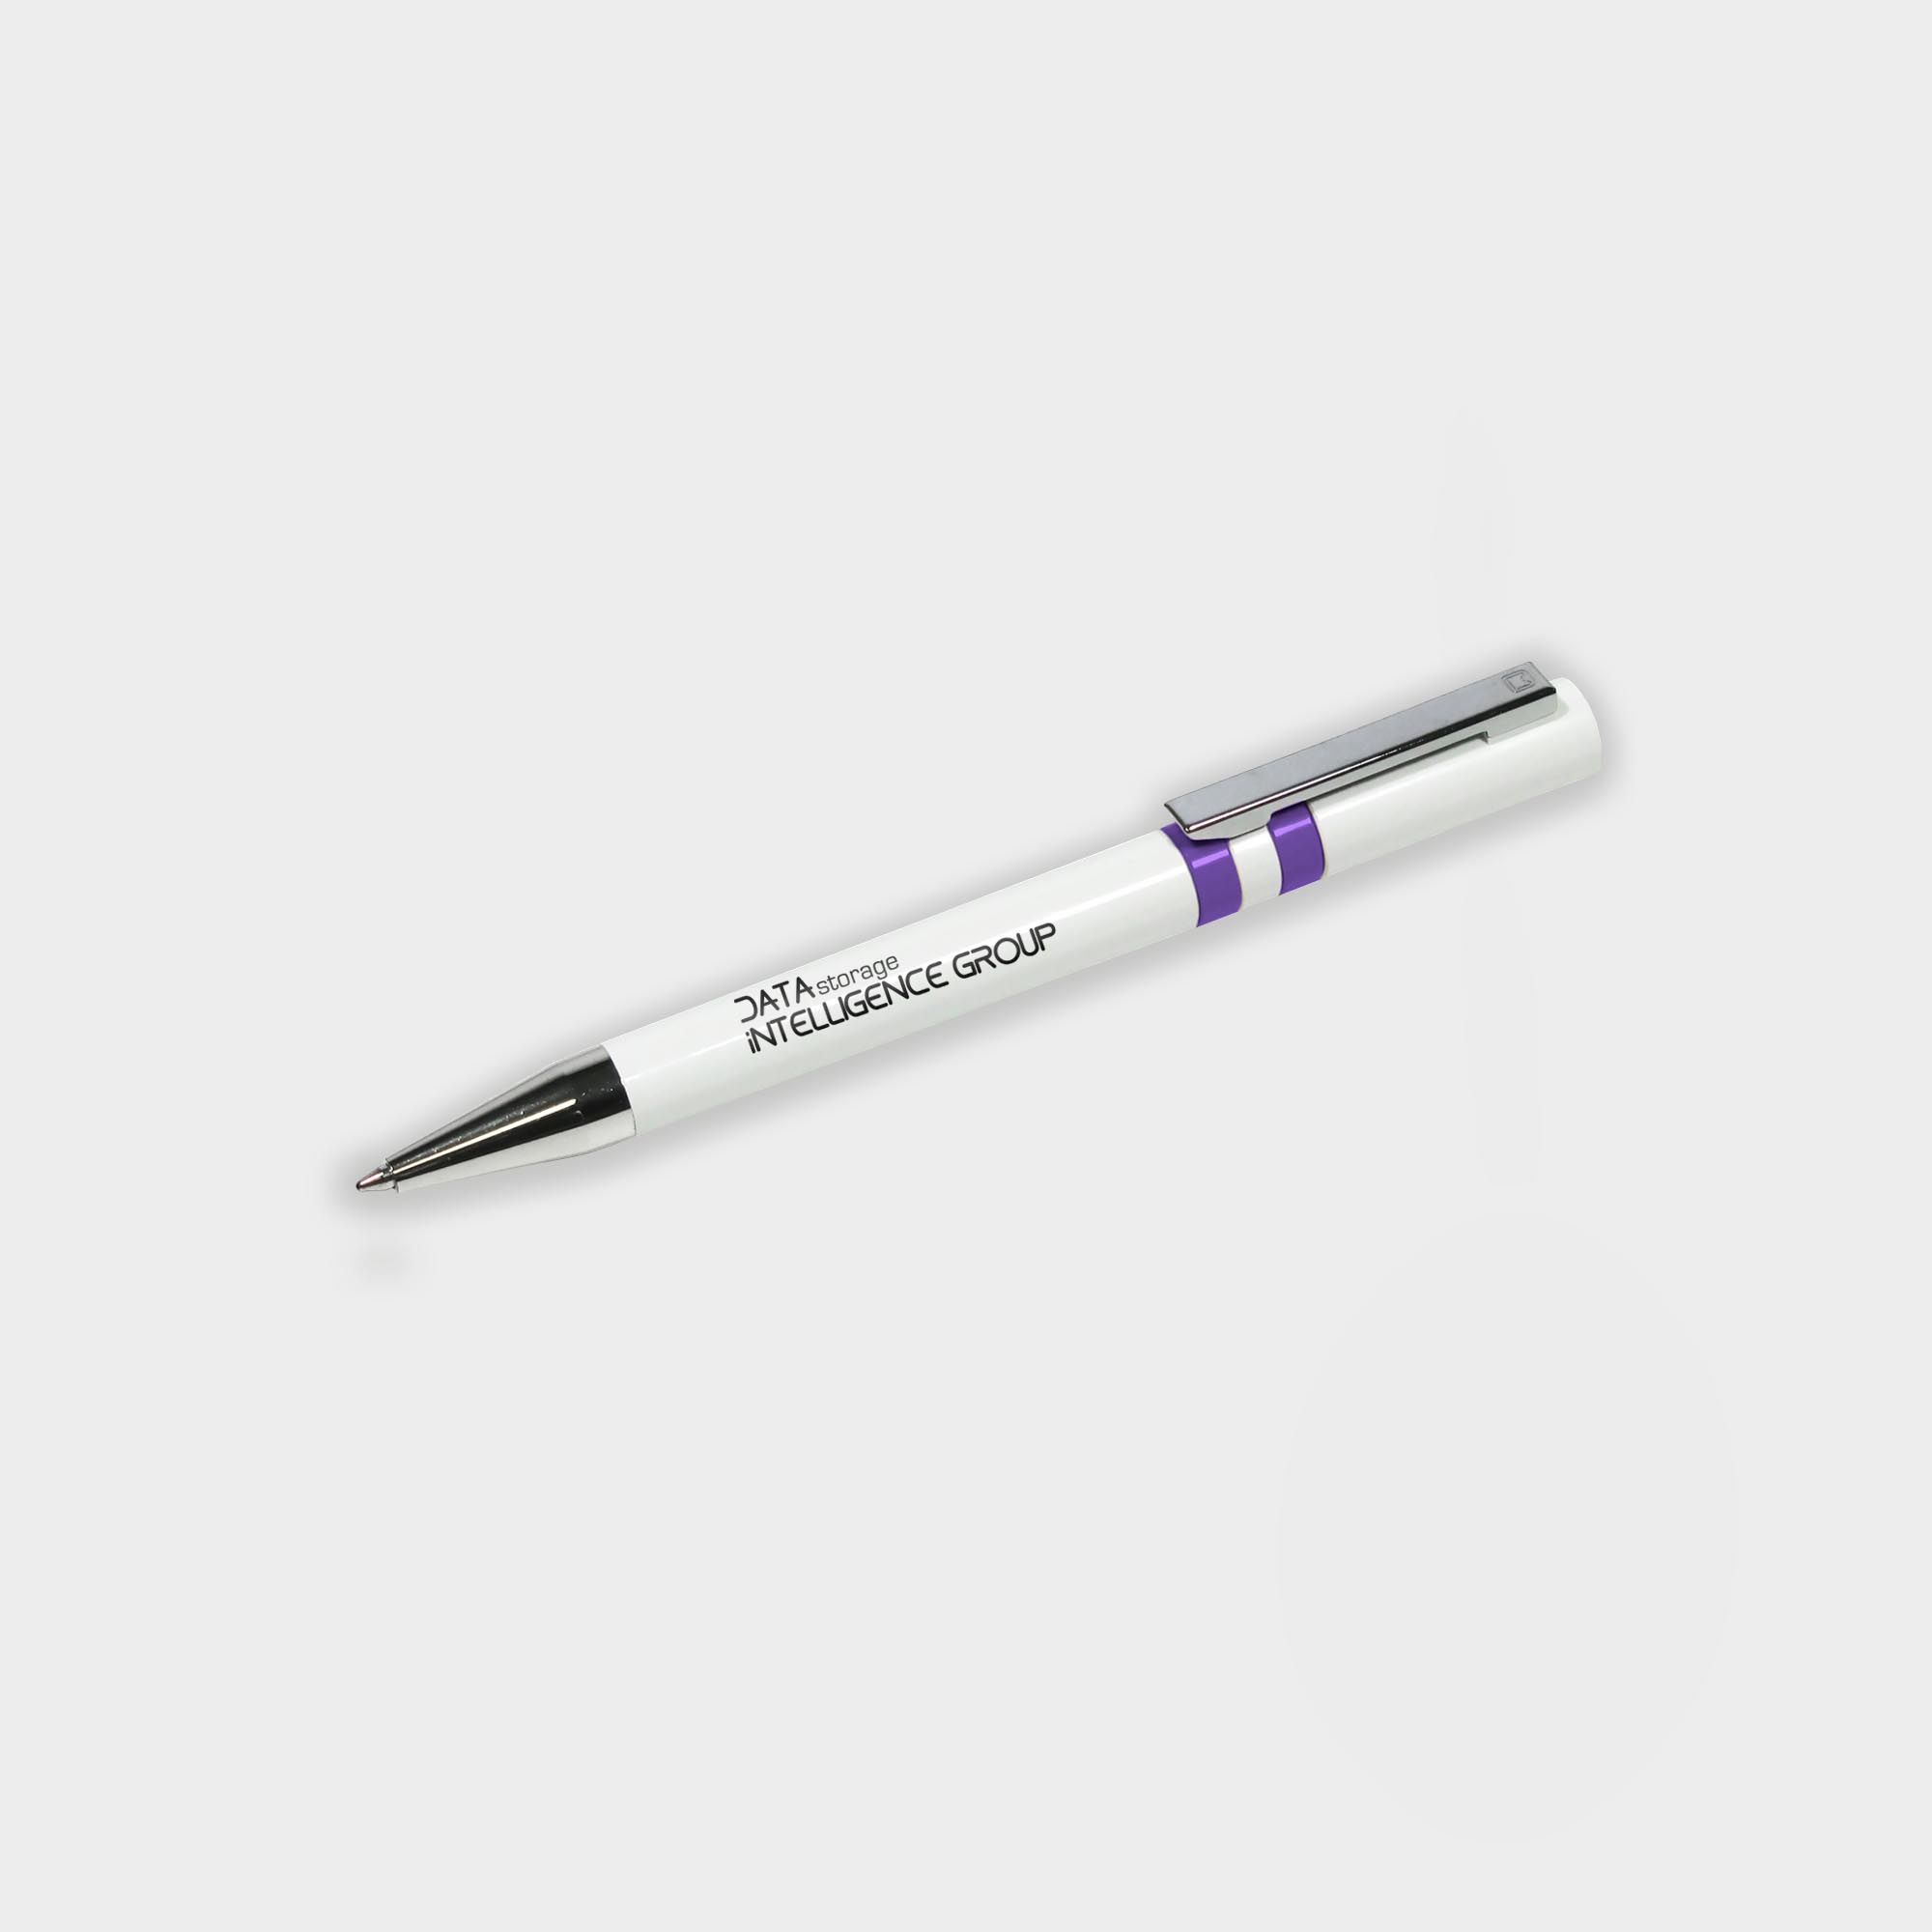 The Green & Good Ethic Pen made from recycled plastic. Stylish executive pen with chrome tip and various colour upon request. Black ink as standard. White / Purple